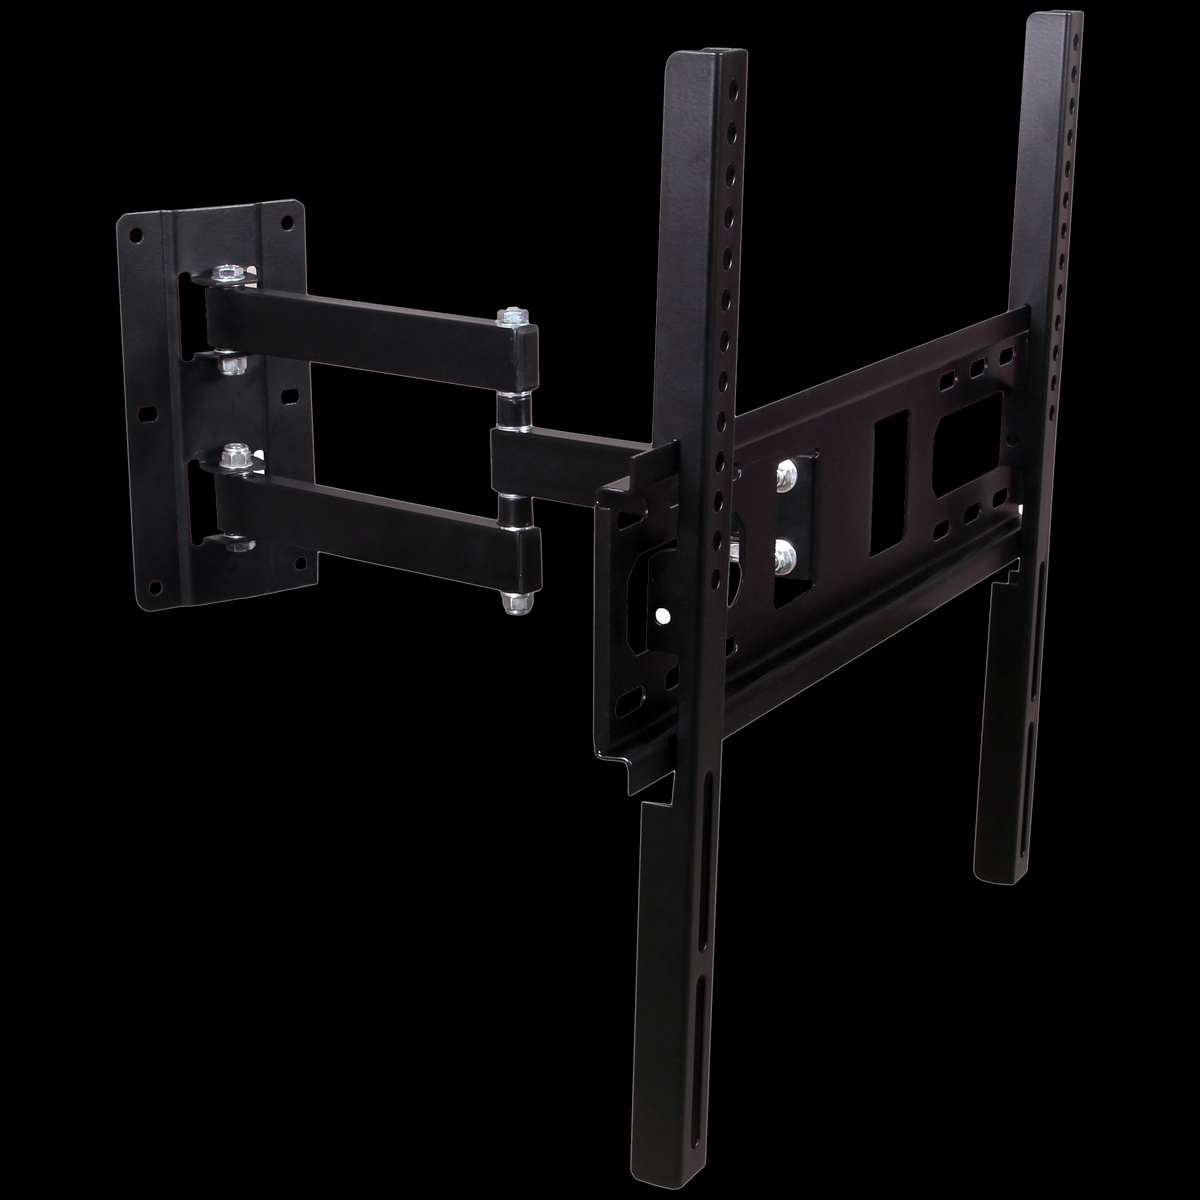 Tips for Installing a TV Mount